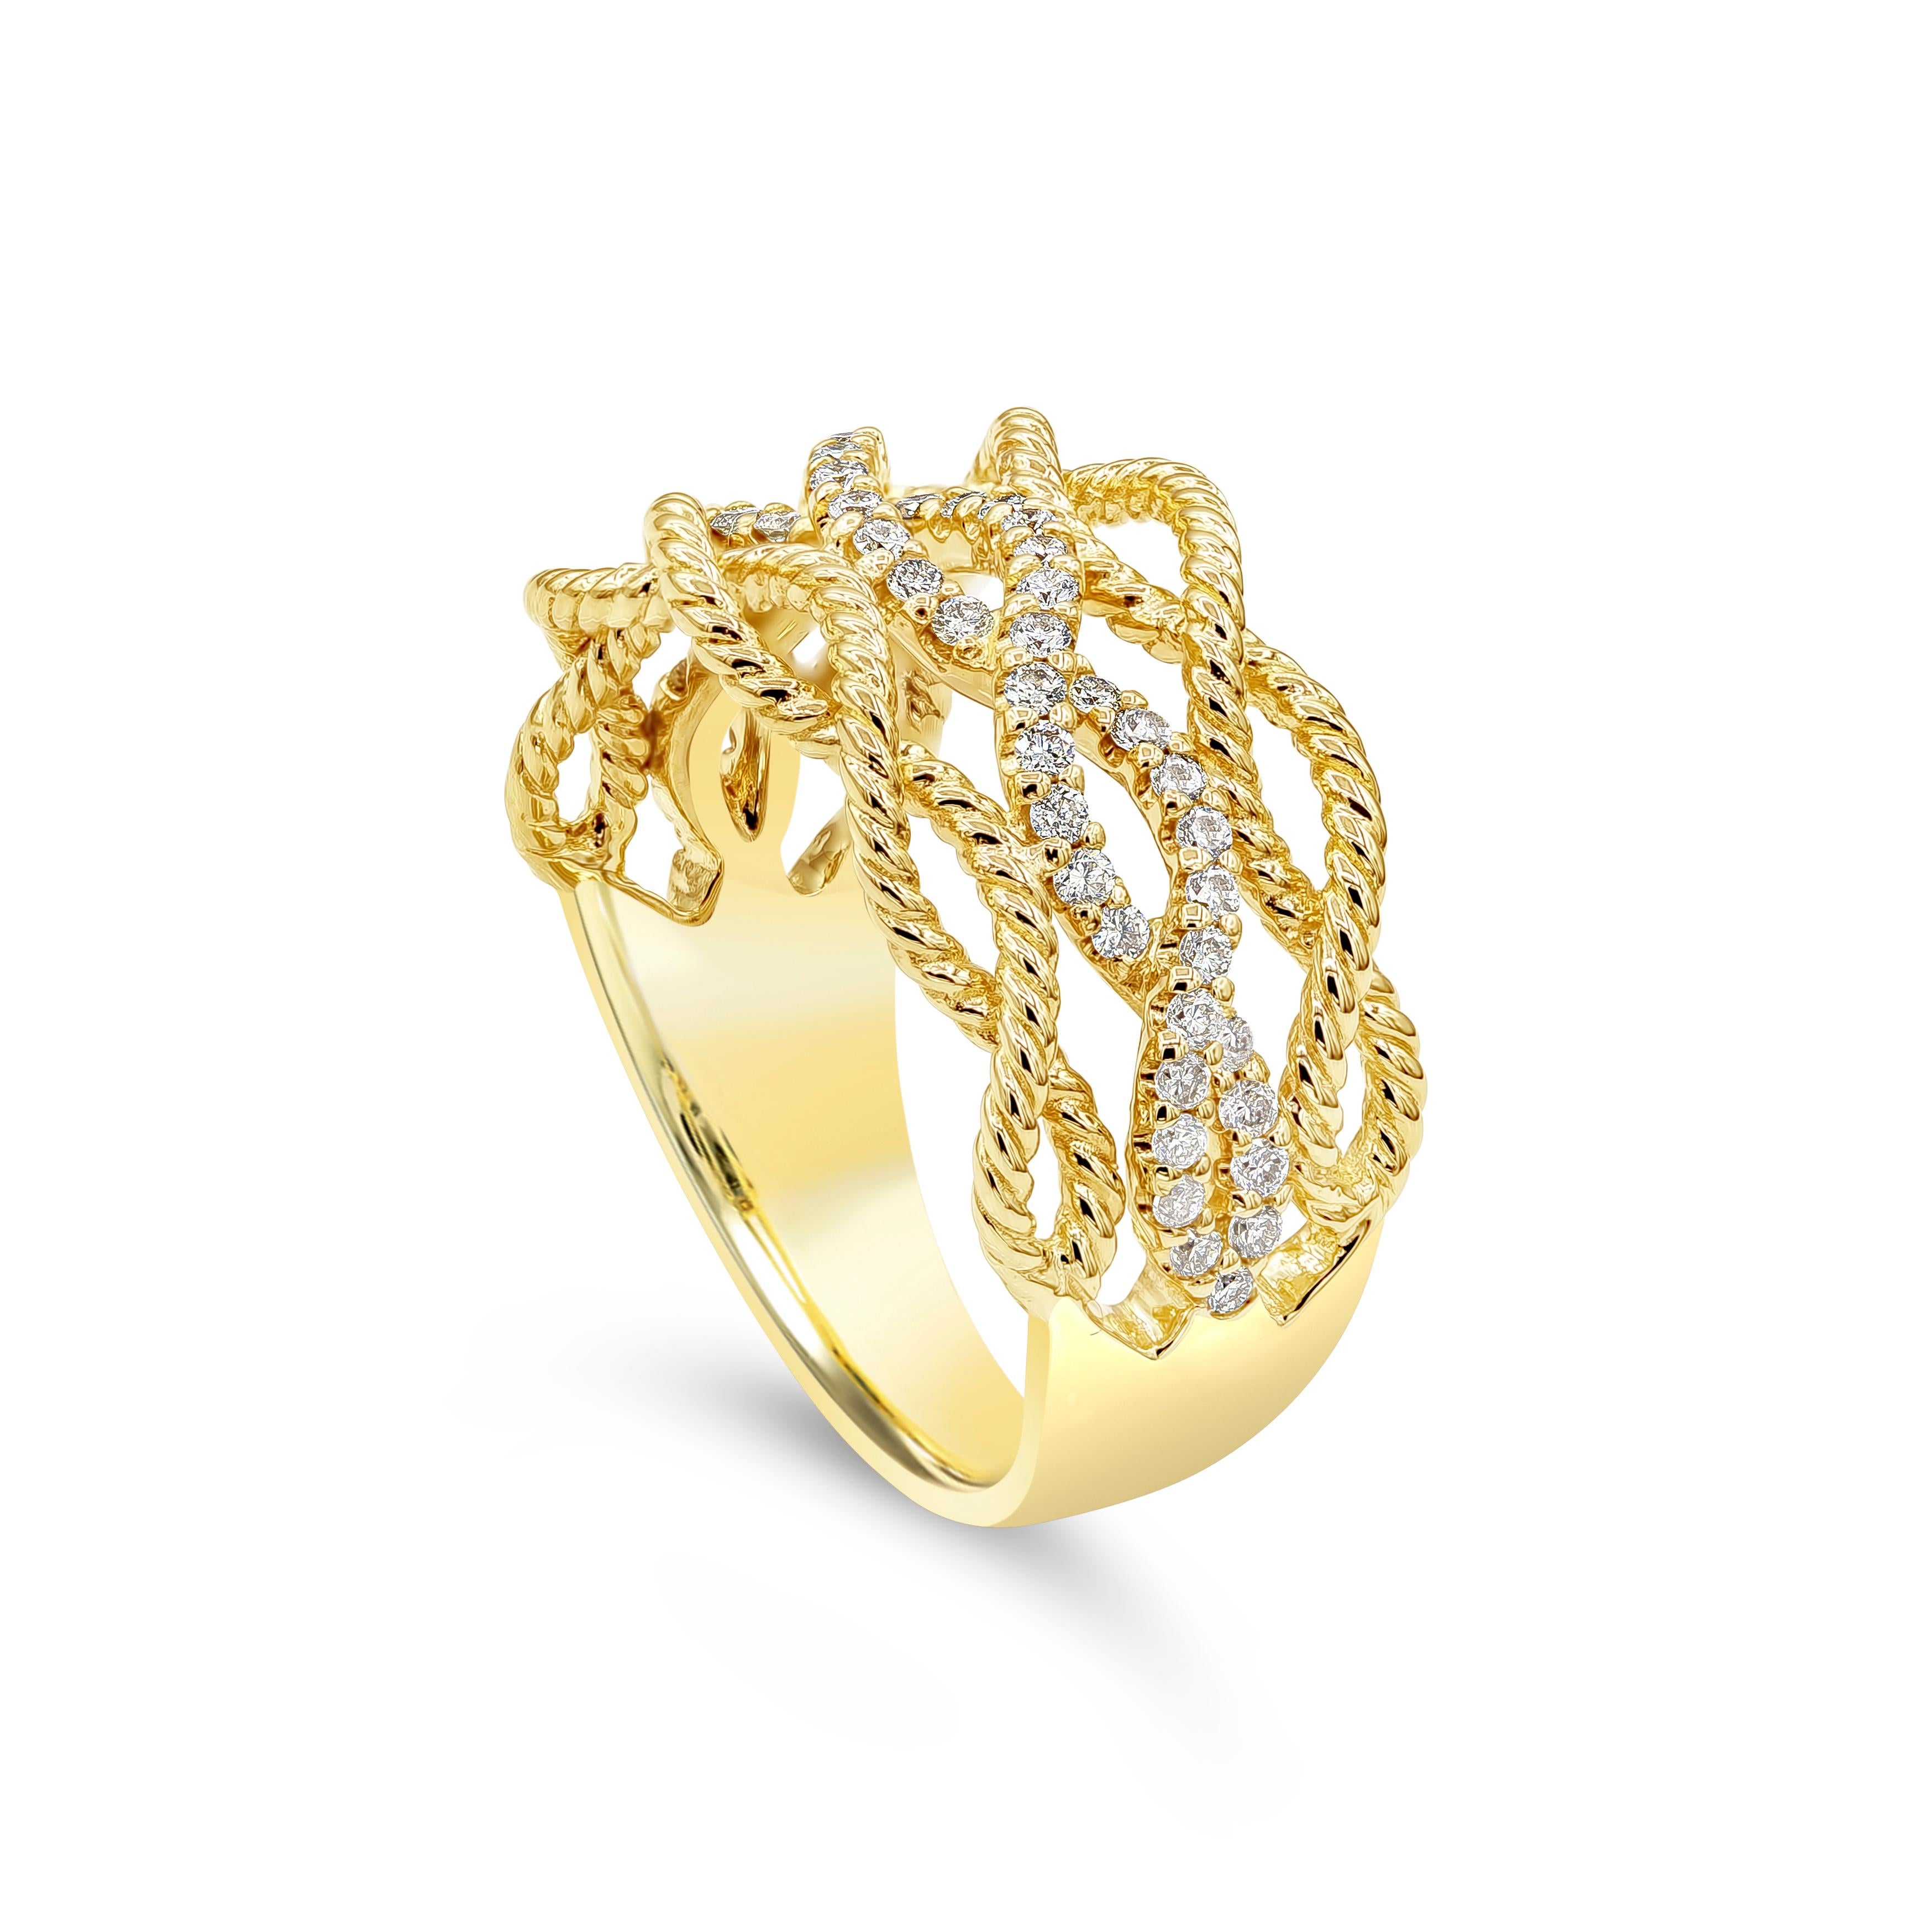 A fashionable infinity style ring showcasing a three rows of 14K yellow gold infinity design encrusted with round brilliant diamonds weighing 0.45 carats total, H-I color and SI in clarity. Size 7.25 US resizable upon request. Signed piece by